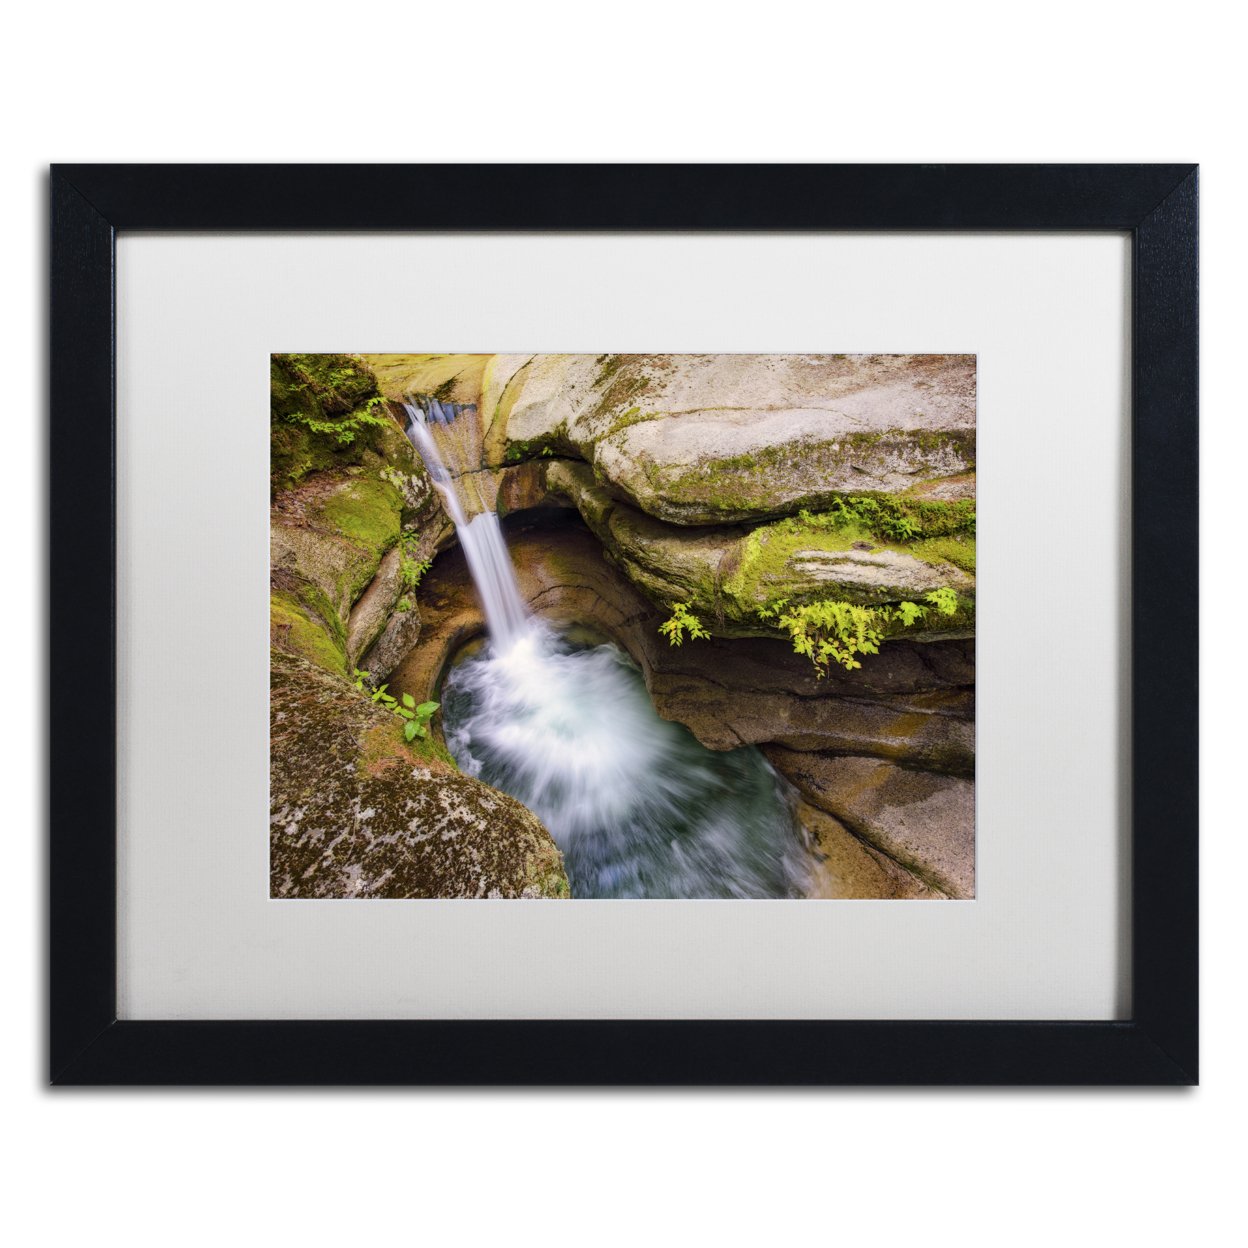 Michael Blanchette Photography 'Sabbaday Punchbowl' Black Wooden Framed Art 18 X 22 Inches